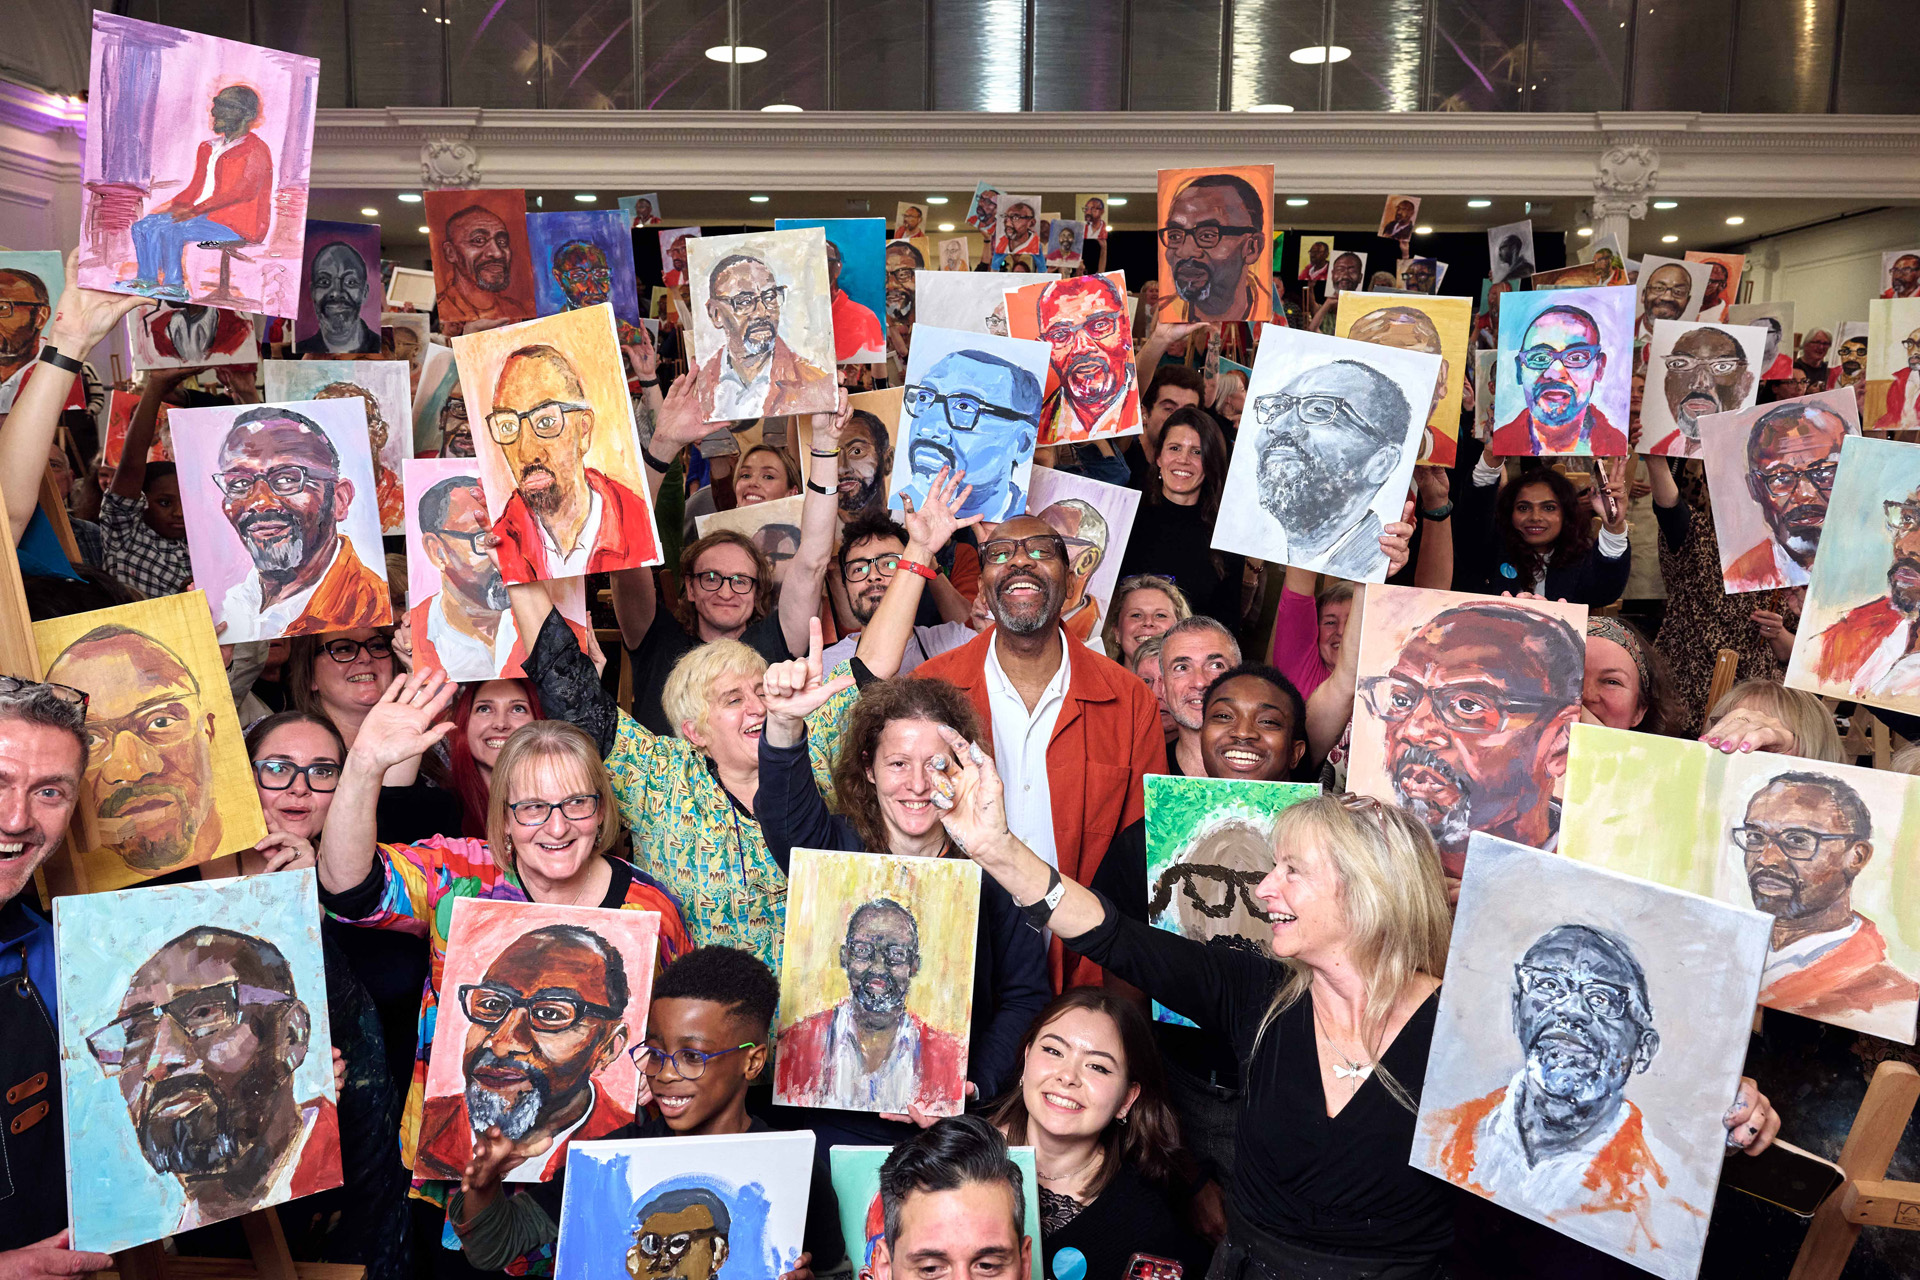 Sir Lenny Henry amongst some of the 200 portraits